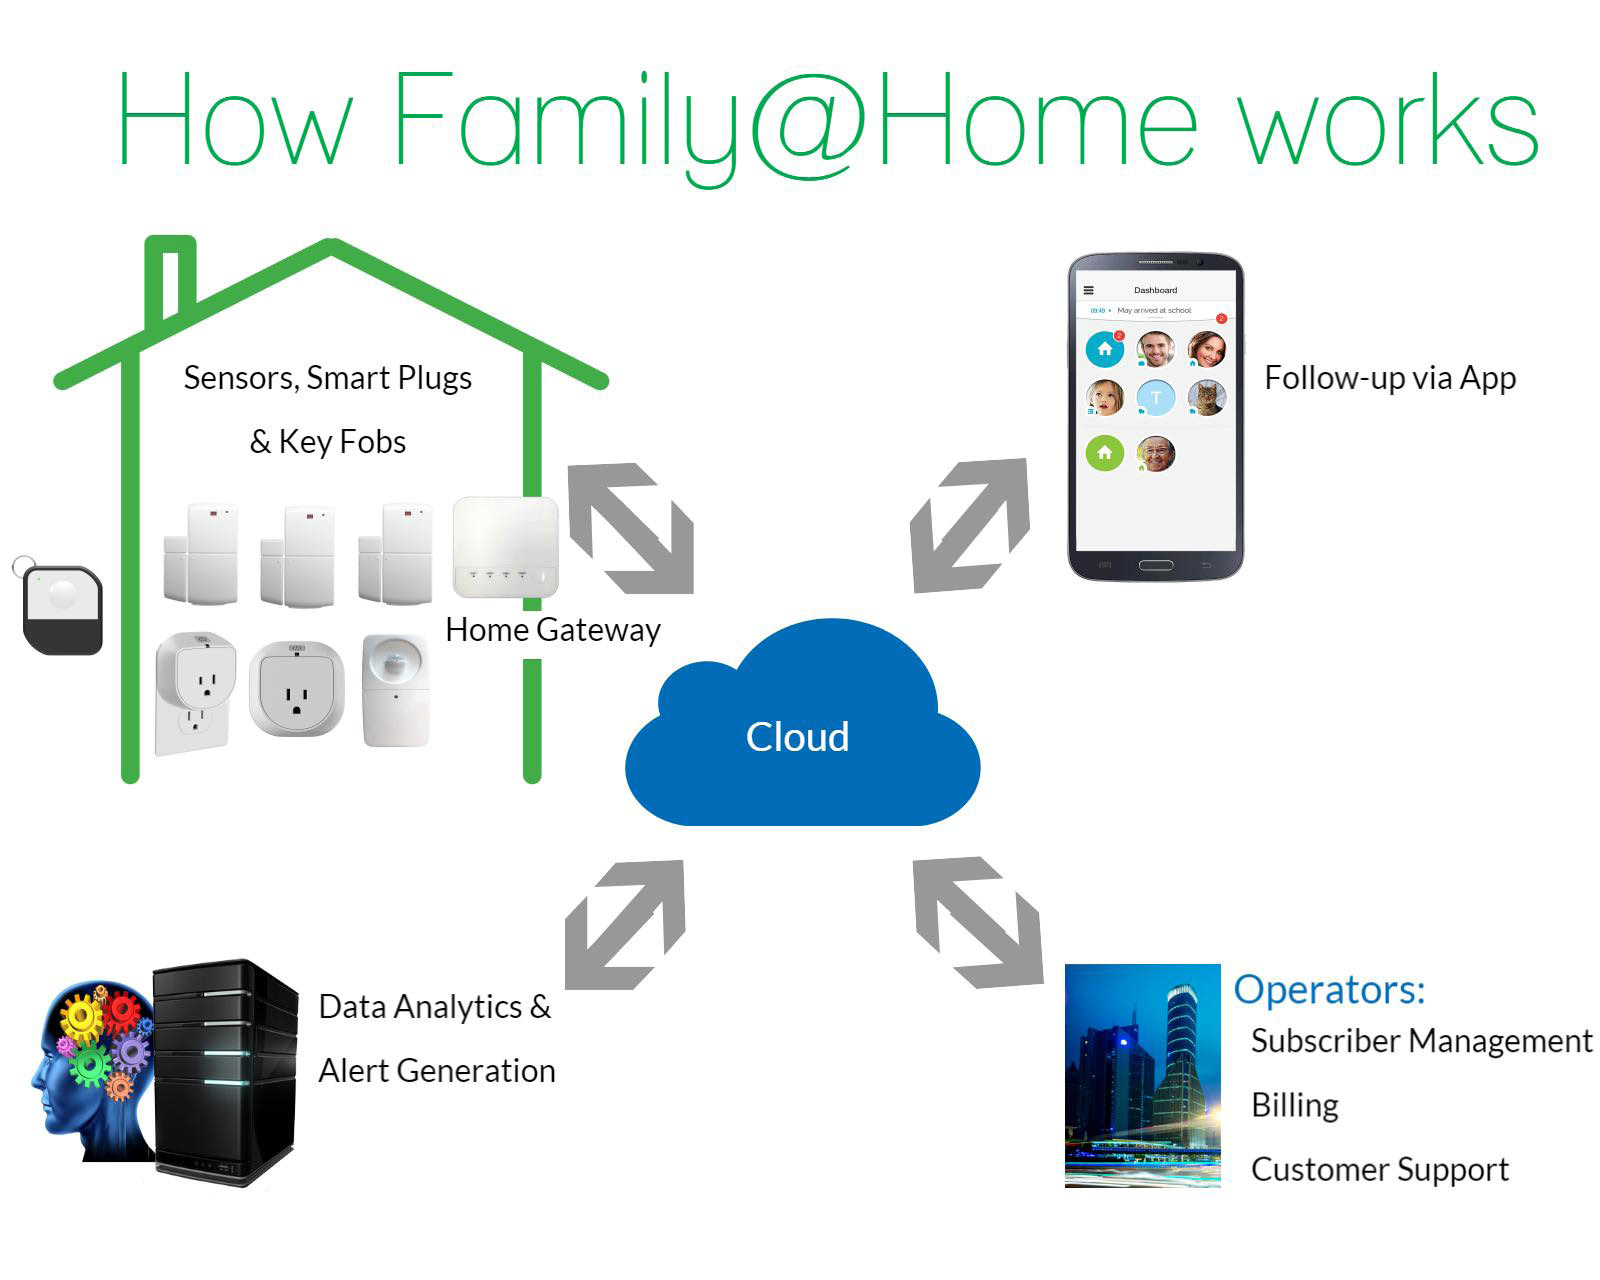 A window of opportunity for smart home service success